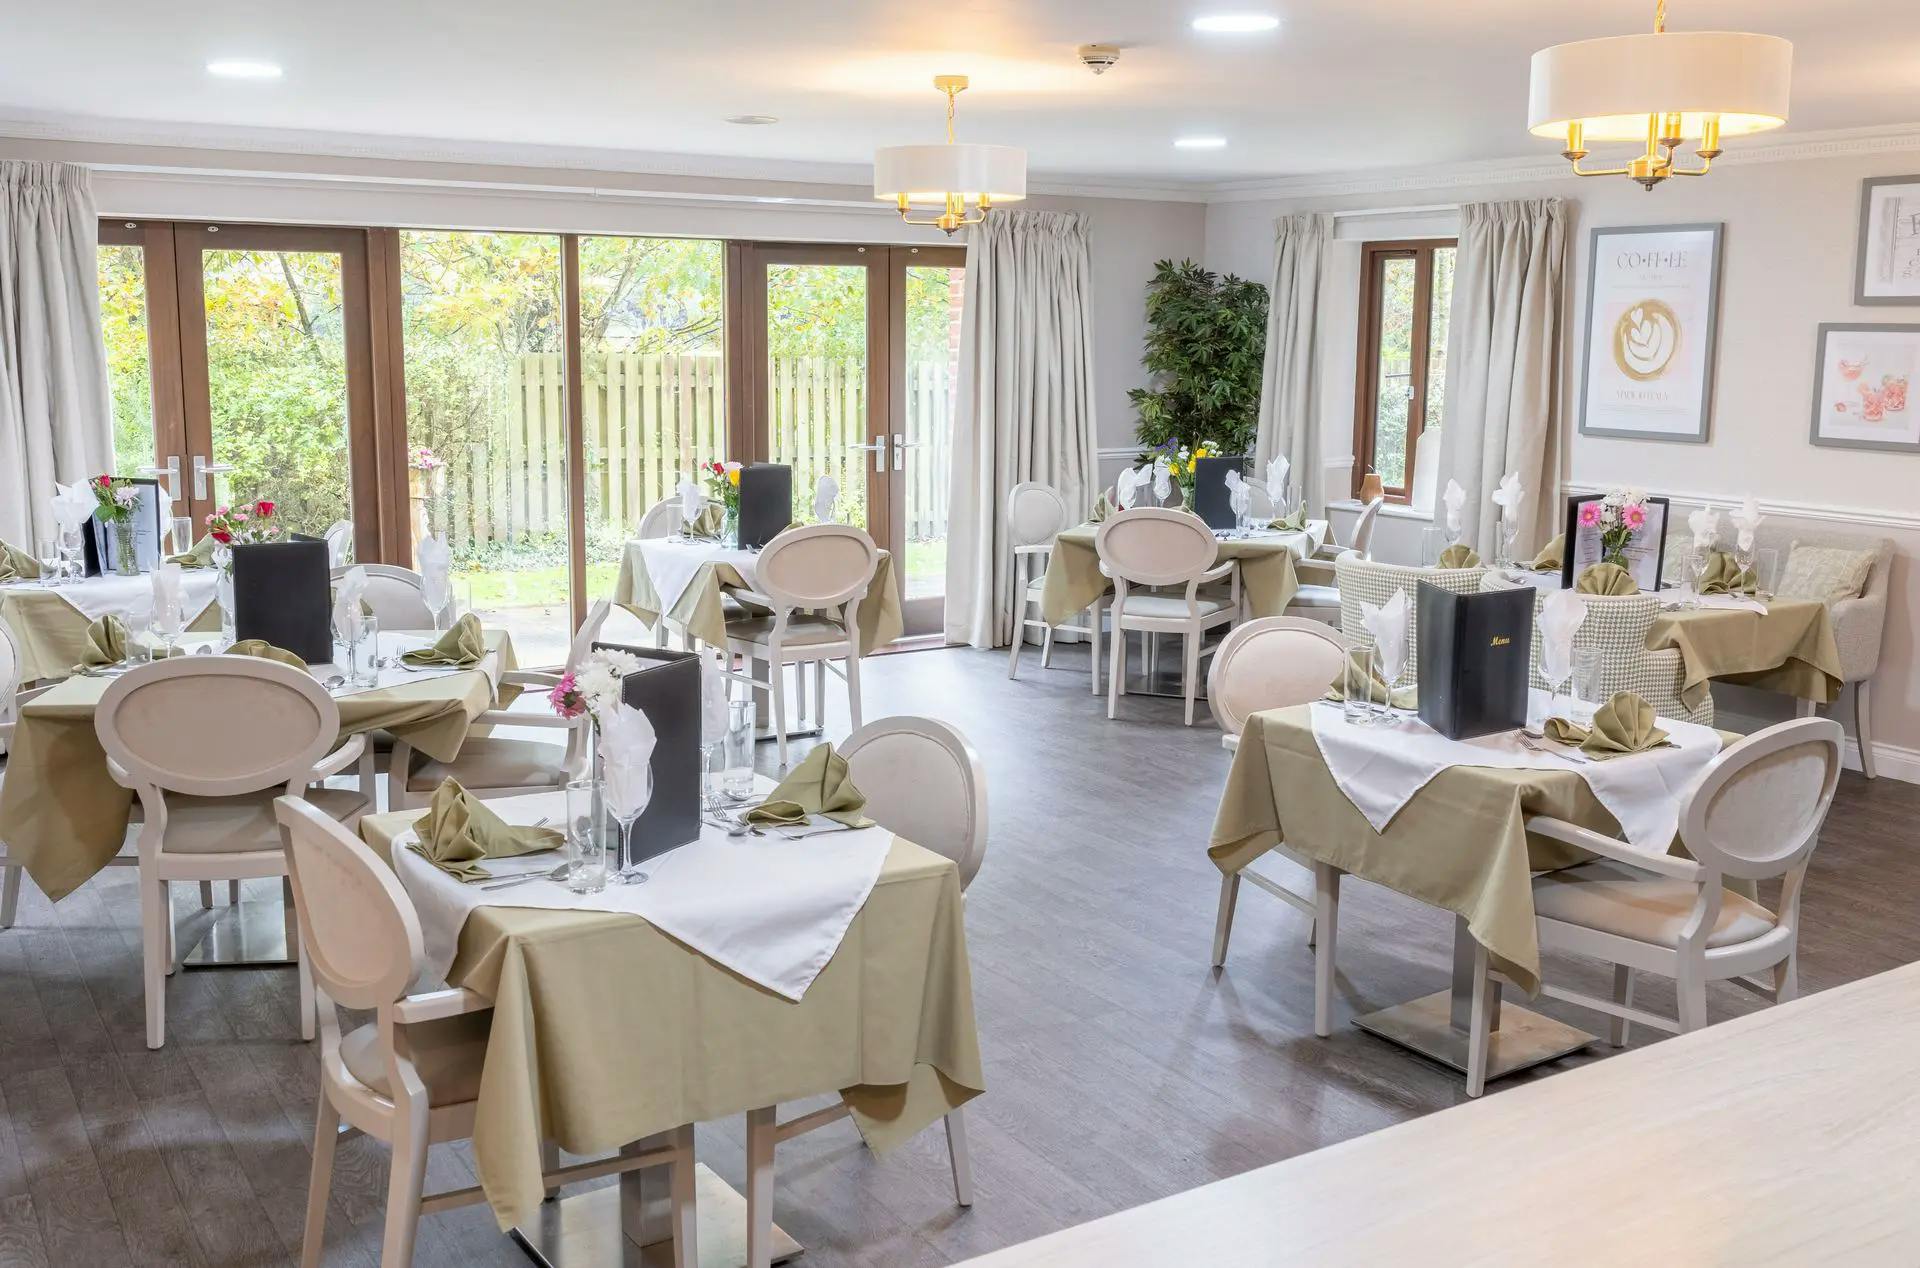 Dining Room at  Abbeycrest Care Home in Reading, Berkshire